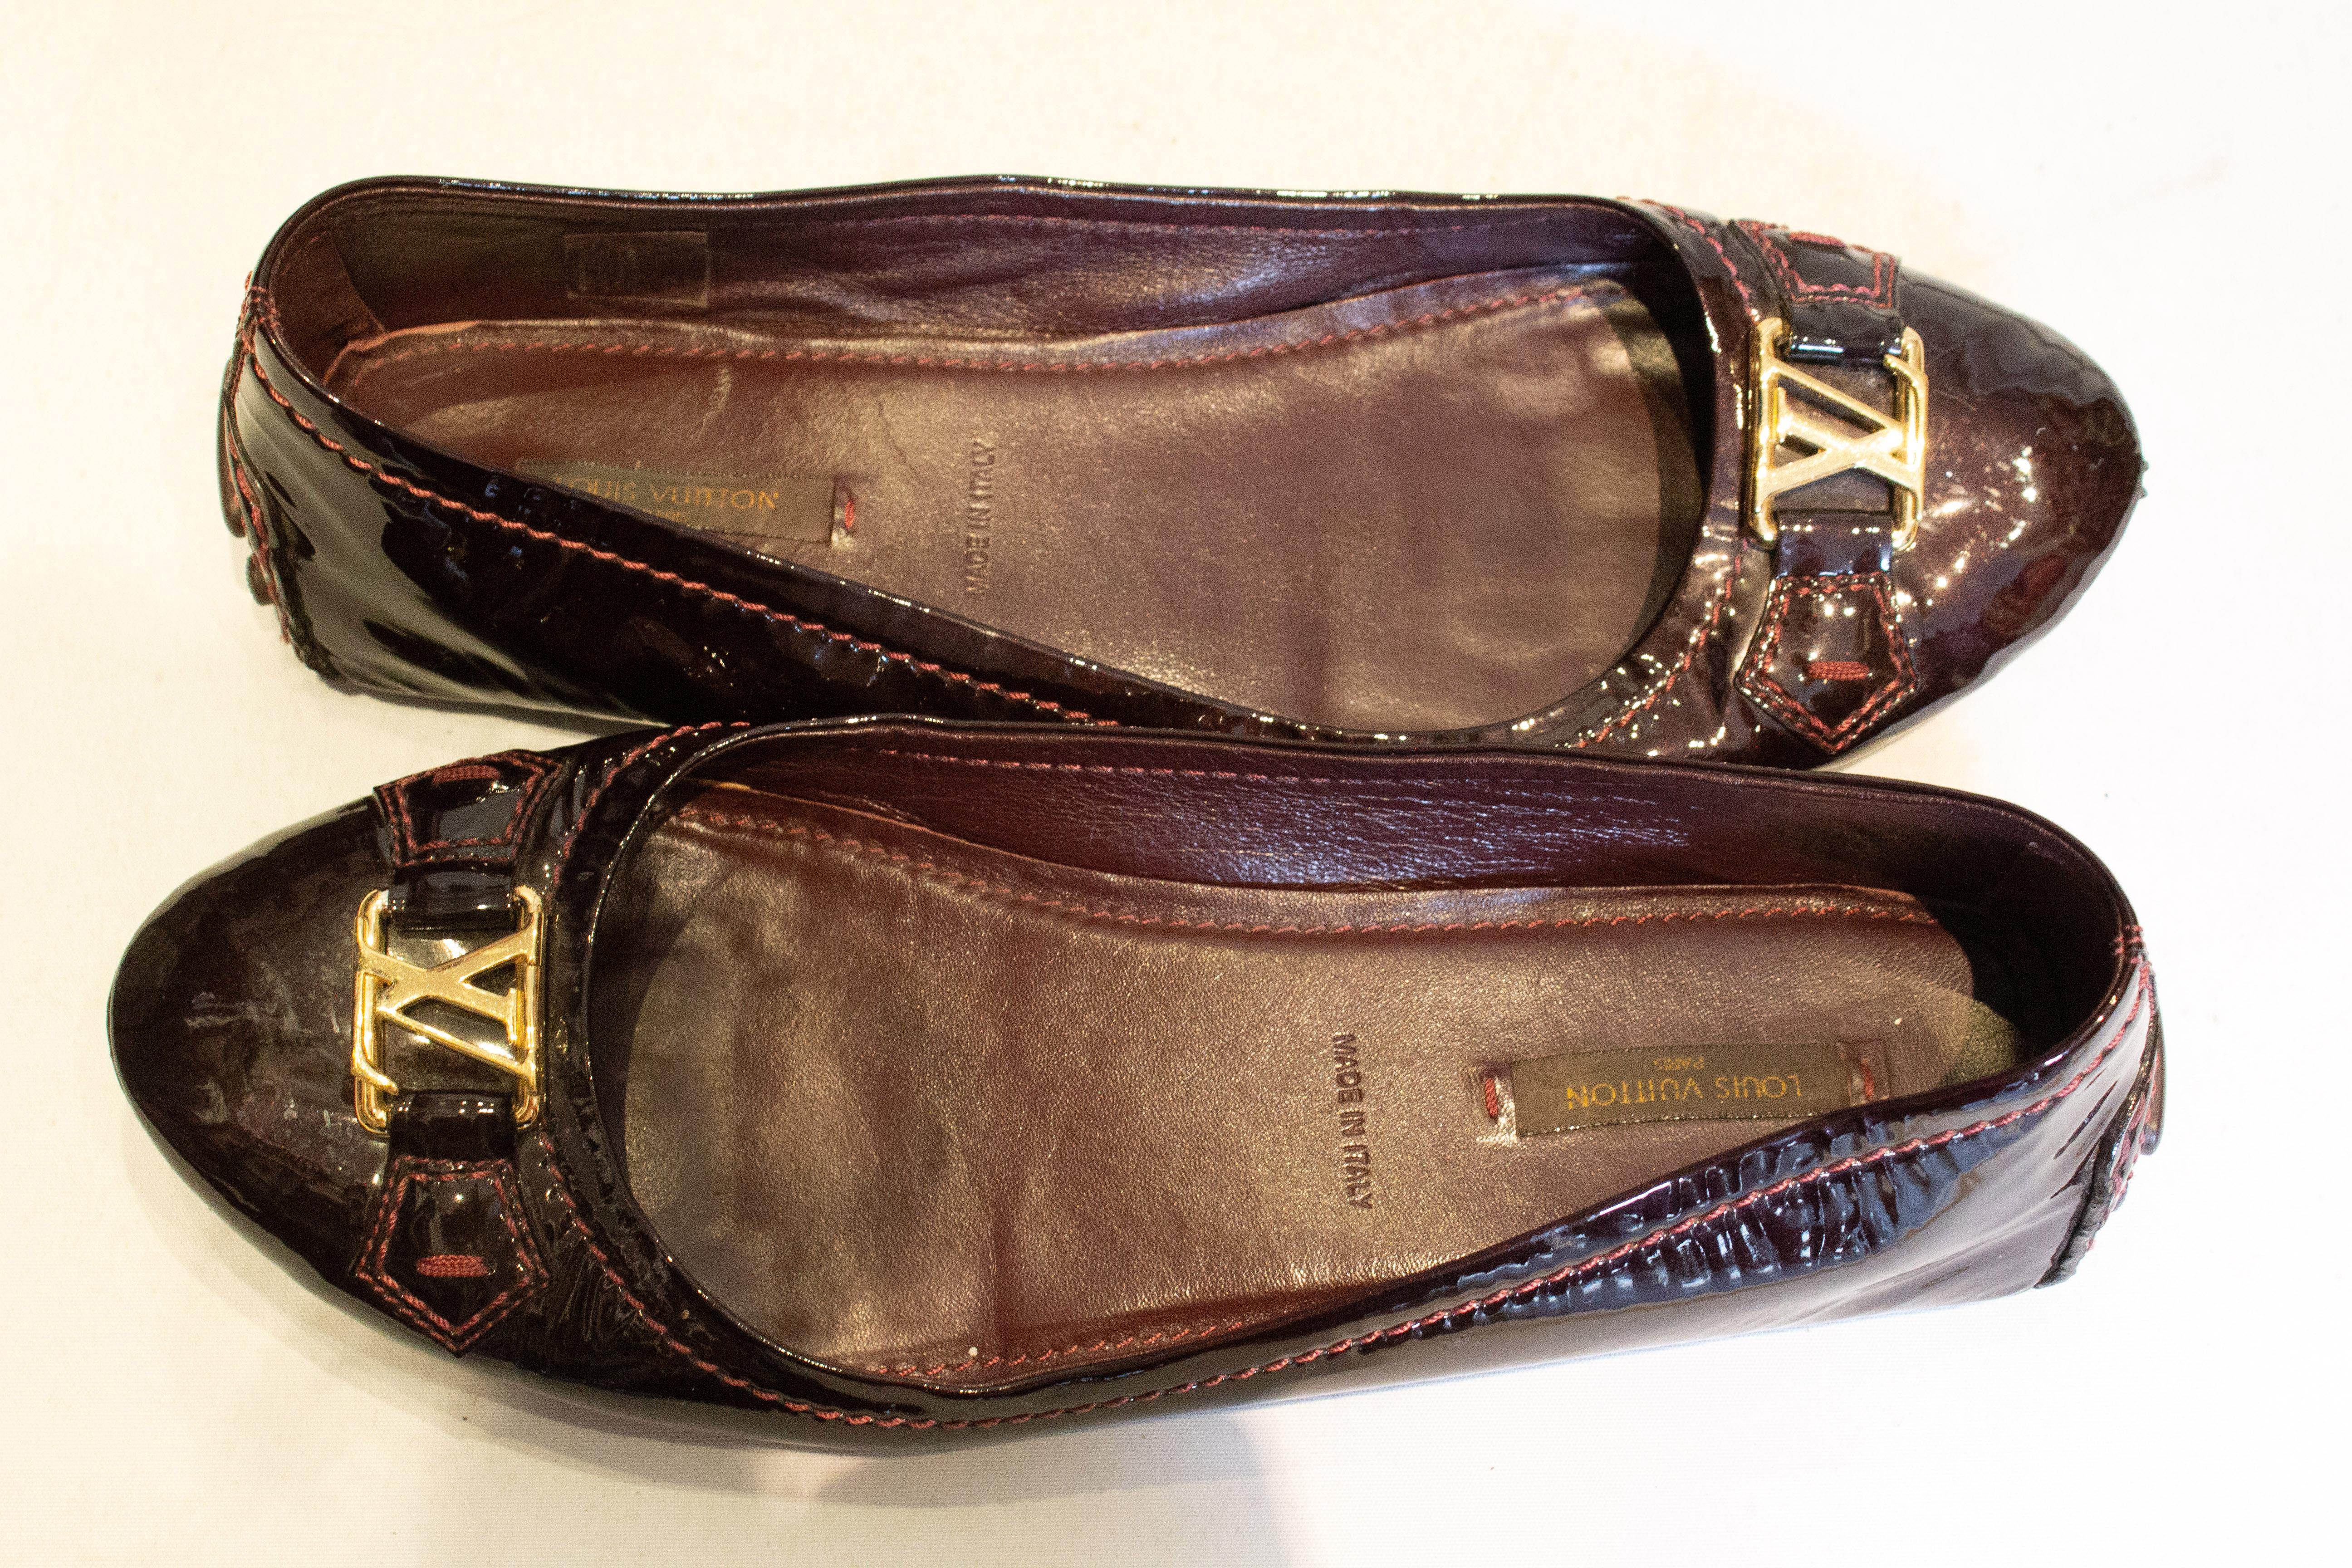 A great pair of pumps by  Louis Vuitton. The shoes are in a burgundgy colour patent leather with 'gold LV detail on the front. They are marked size 39, style FA1100.